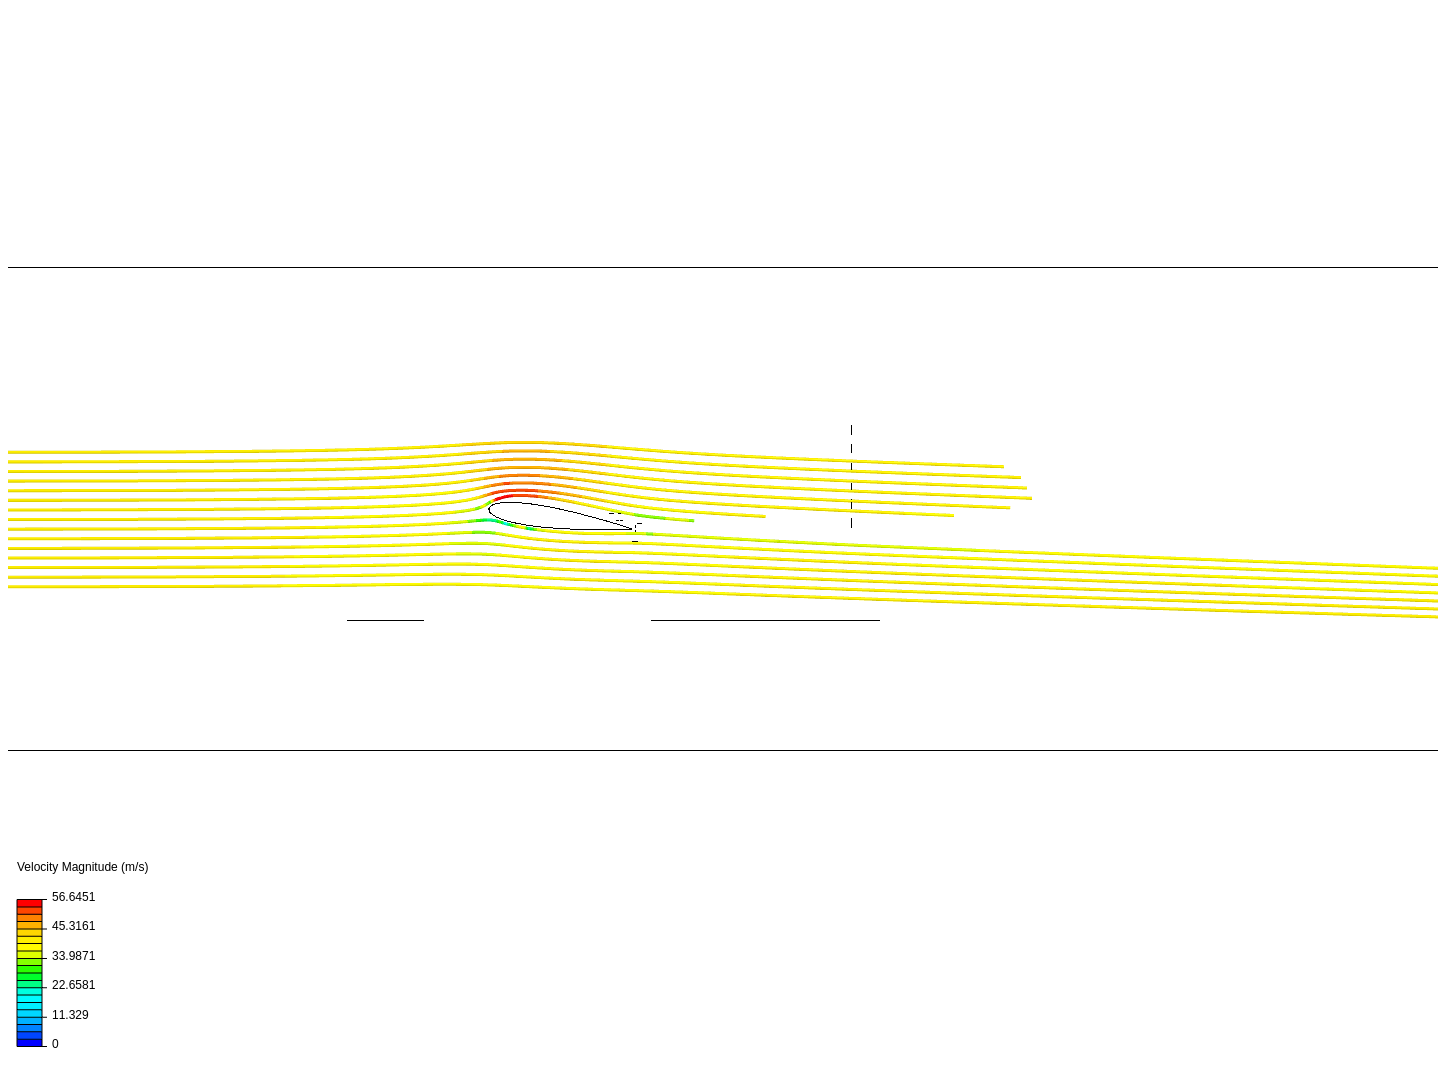 Airfoil_Project 1 image